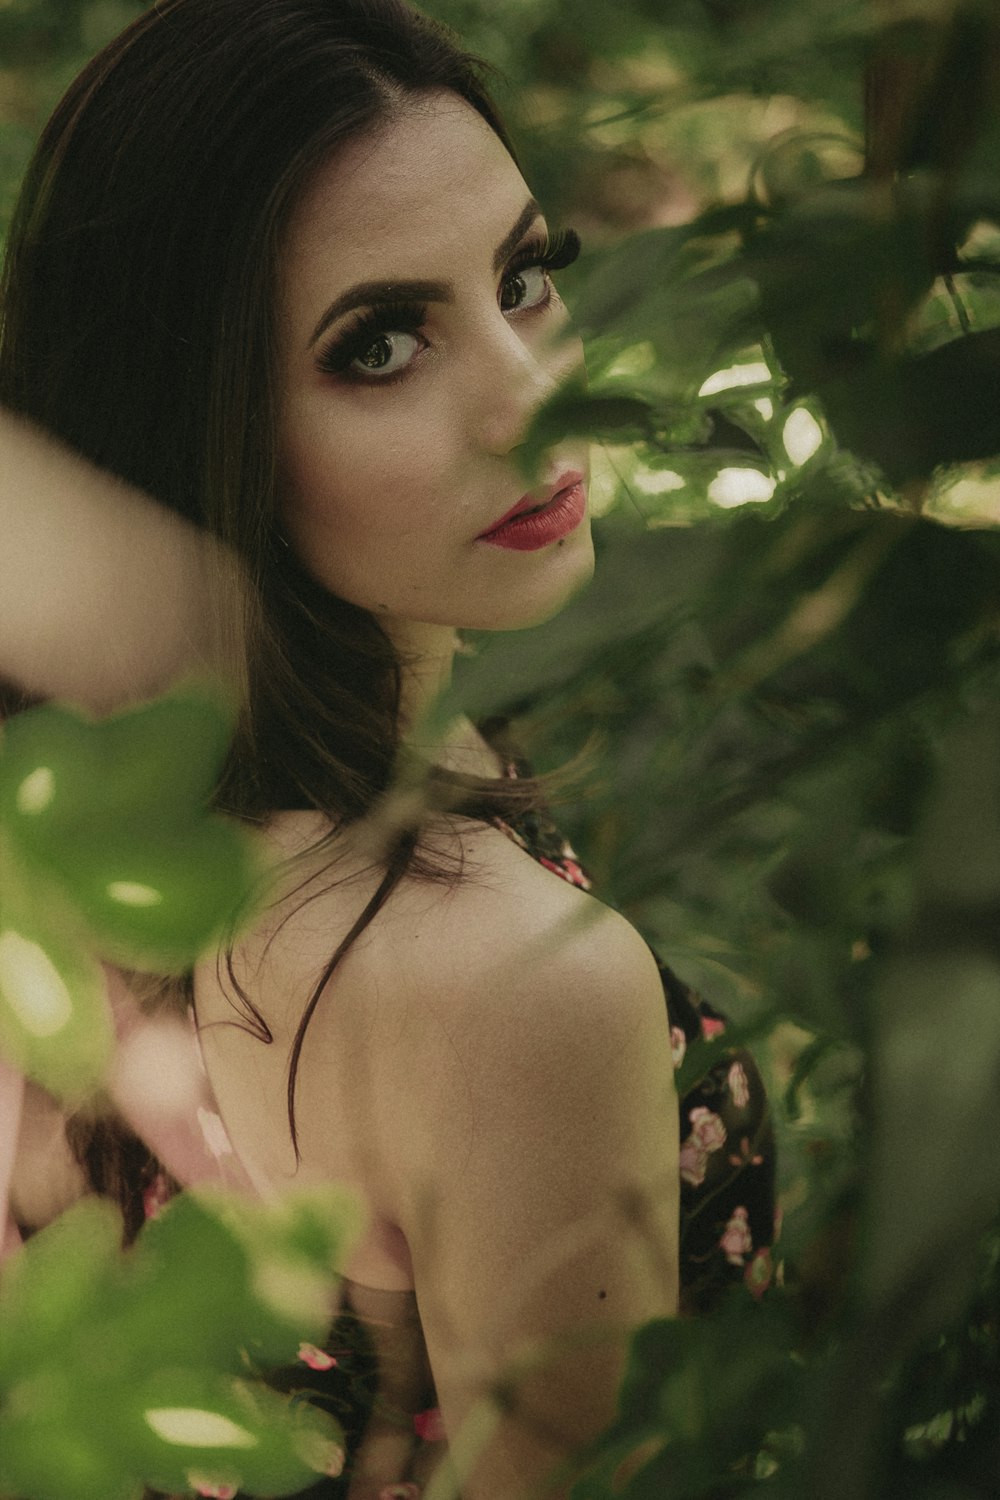 selective focus of woman surrounded by green leafy plants at daytime